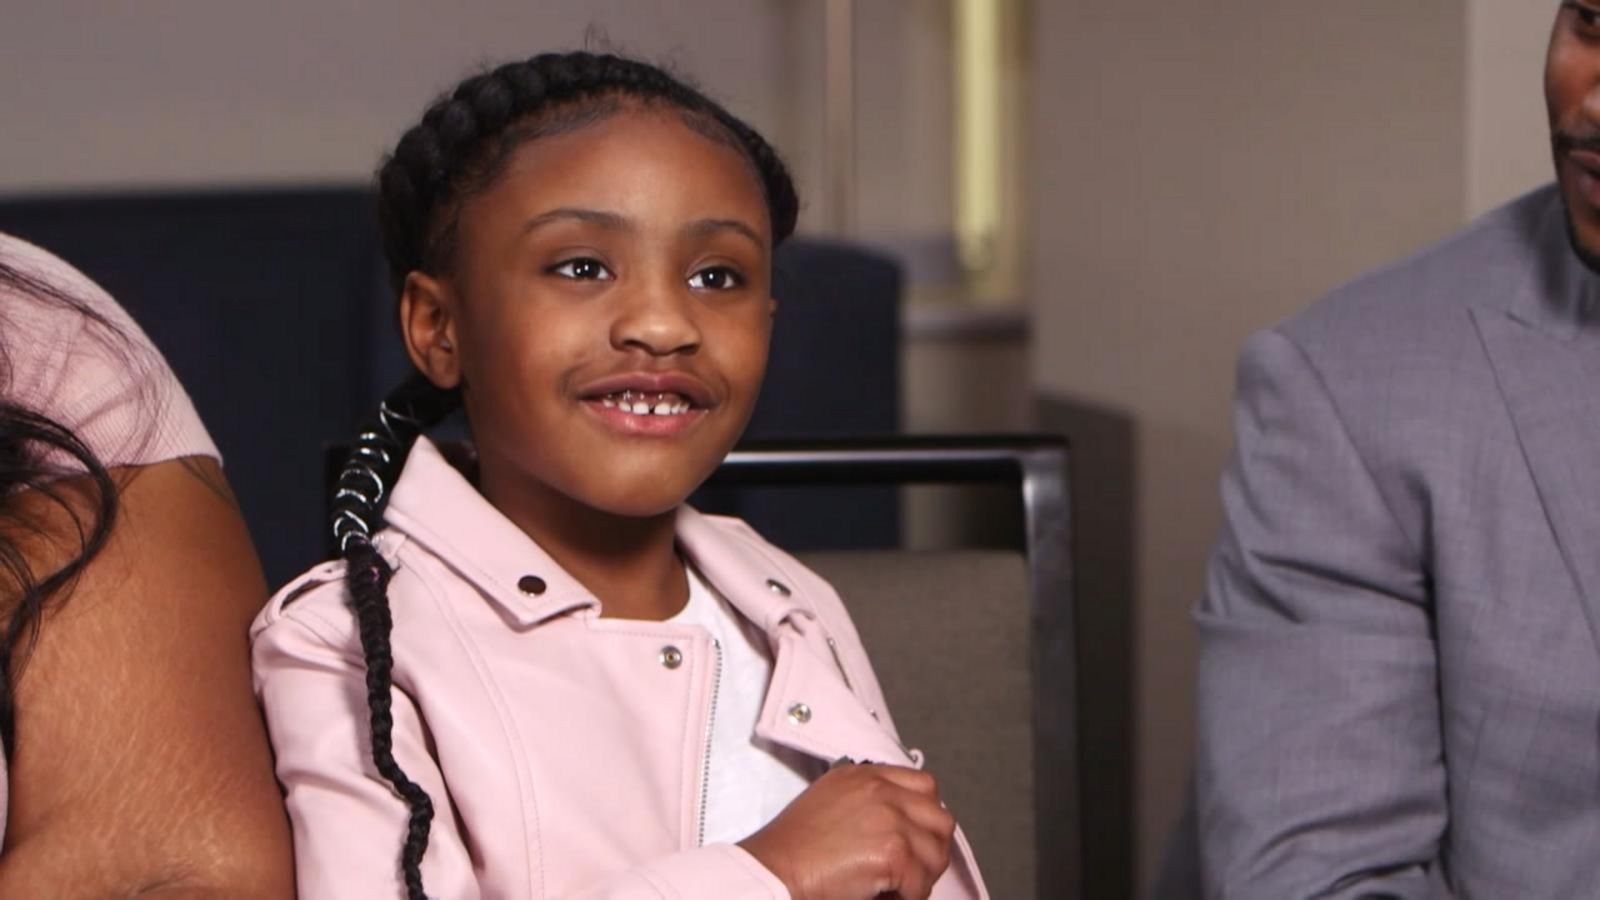 VIDEO: George Floyd's 6-year-old daughter opens up about her dad